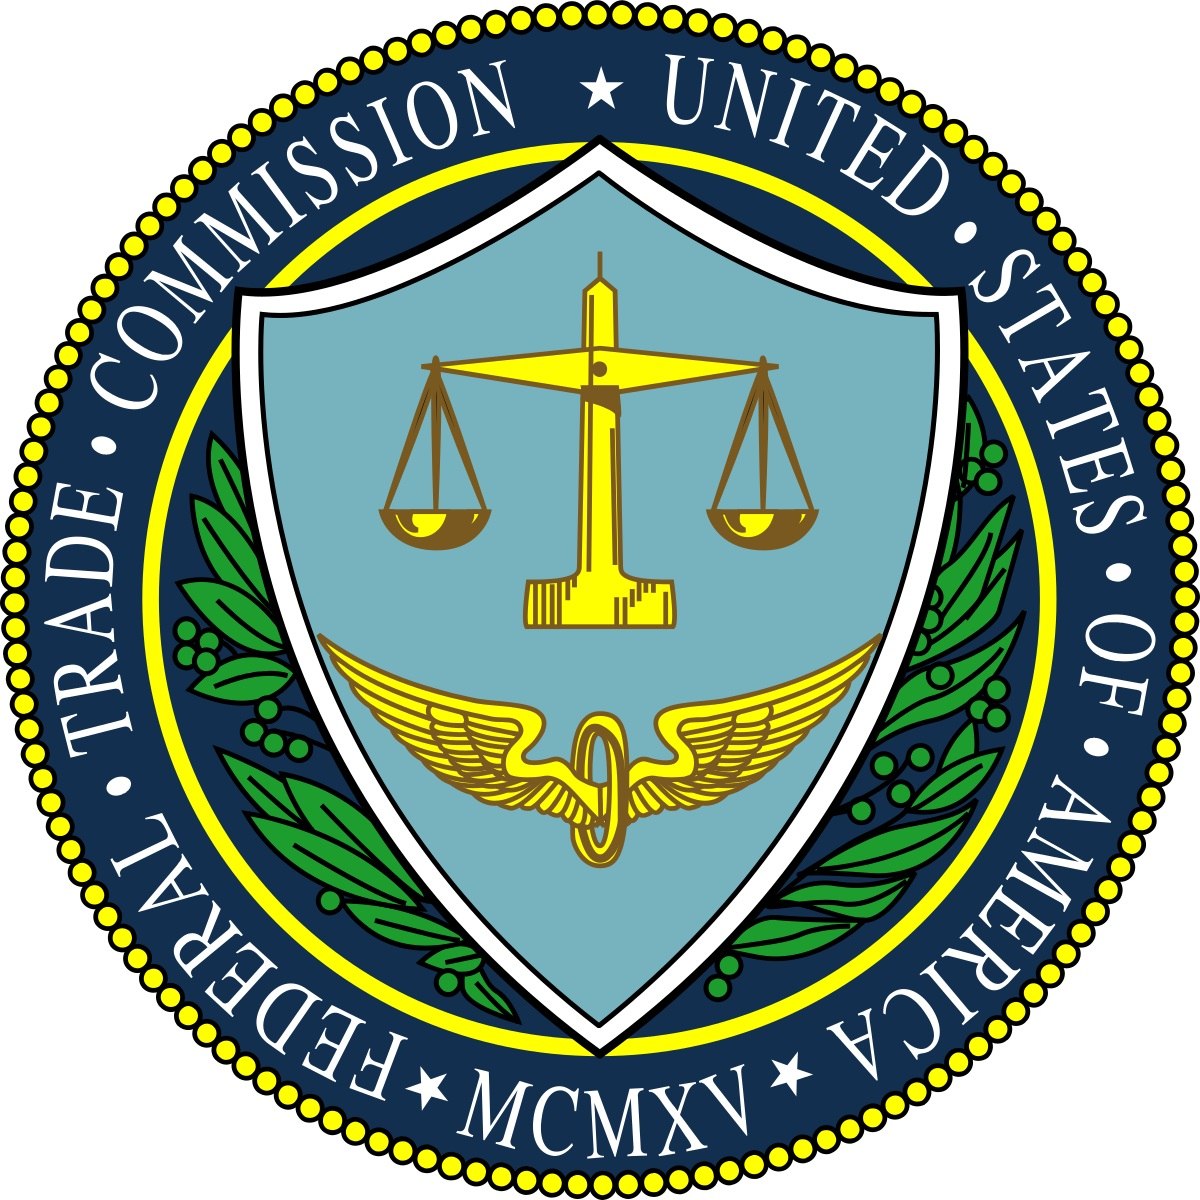 ftc-proposes-stronger-coppa-rules-to-protect-children-from-online-surveillance